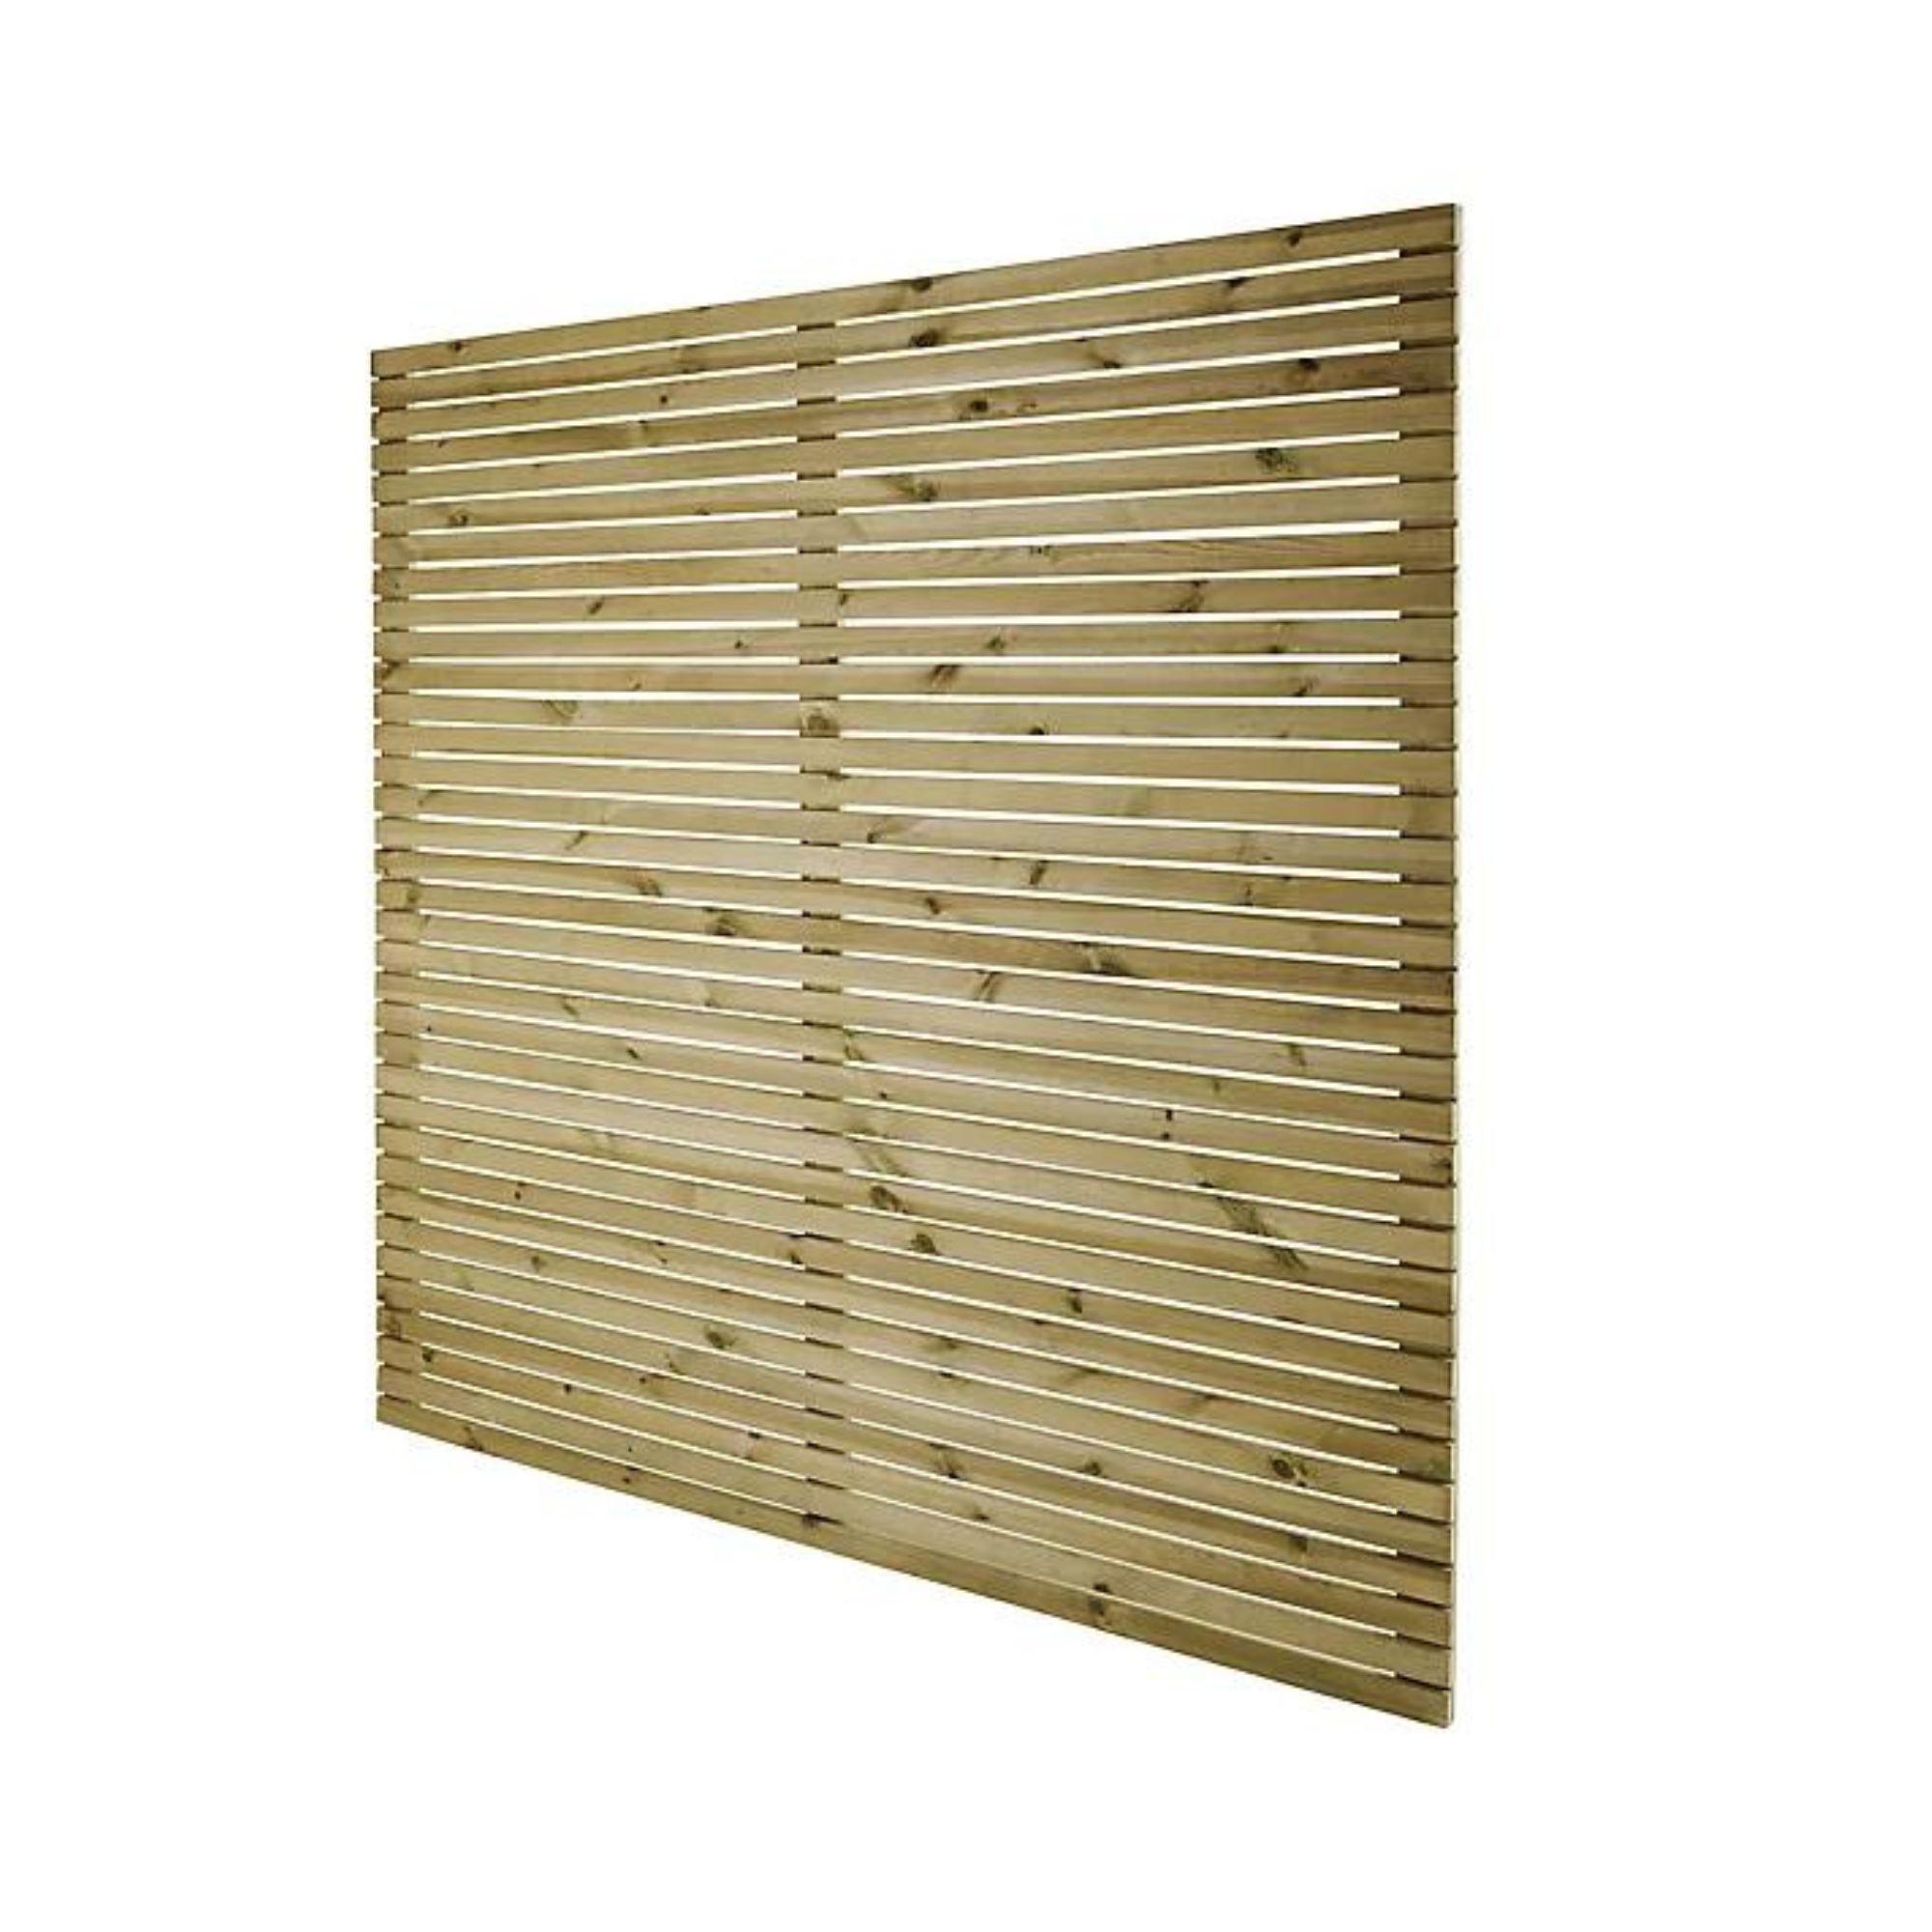 picture of Klikstrom Lemhi wooden fence panel